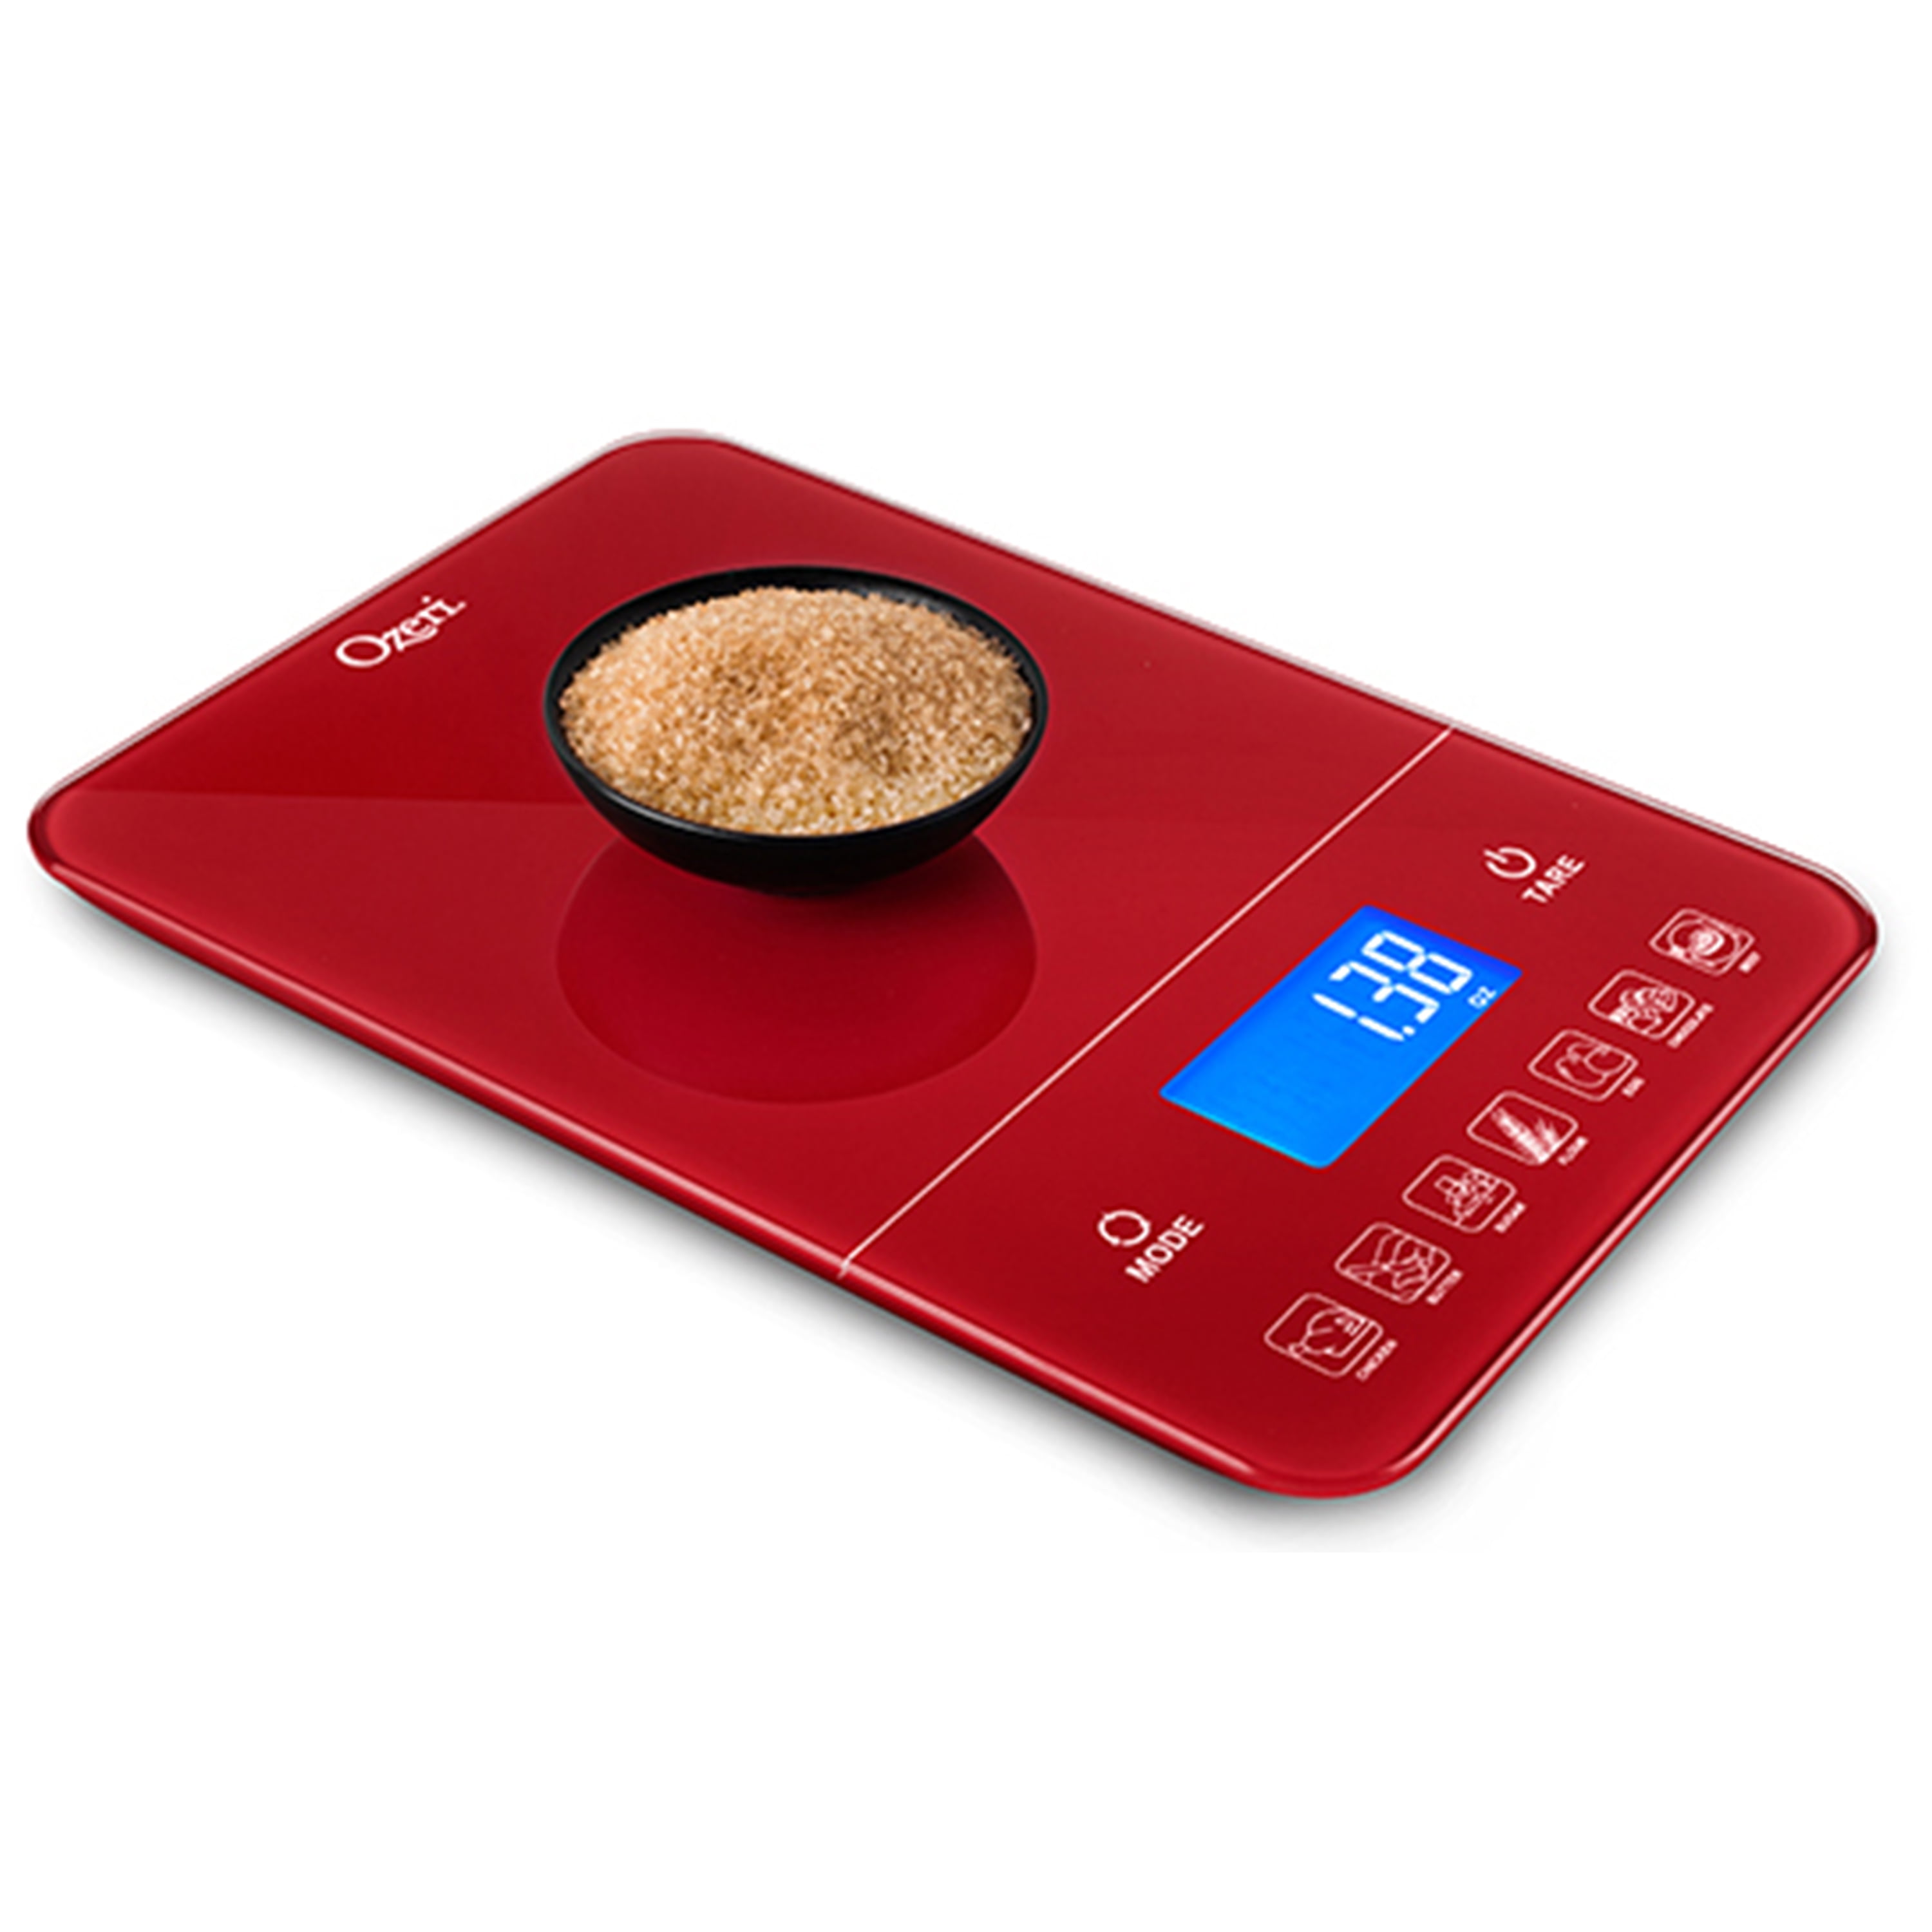 Kitchen scale - Measuring & timing tools - Kitchen & cooking